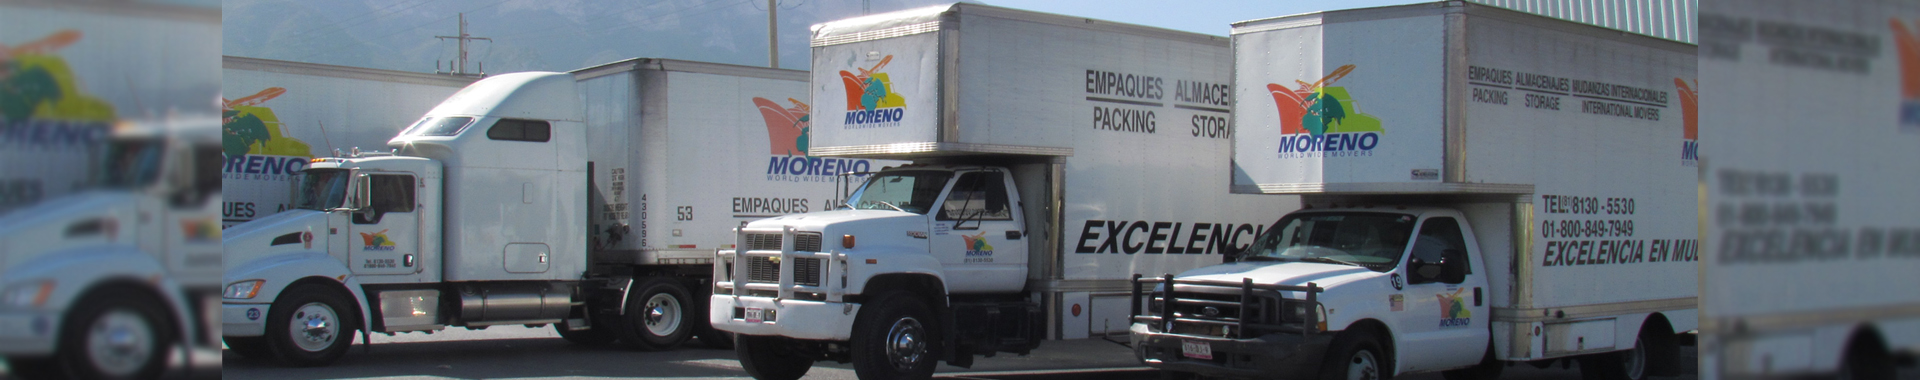 Domestic moving services in mexico